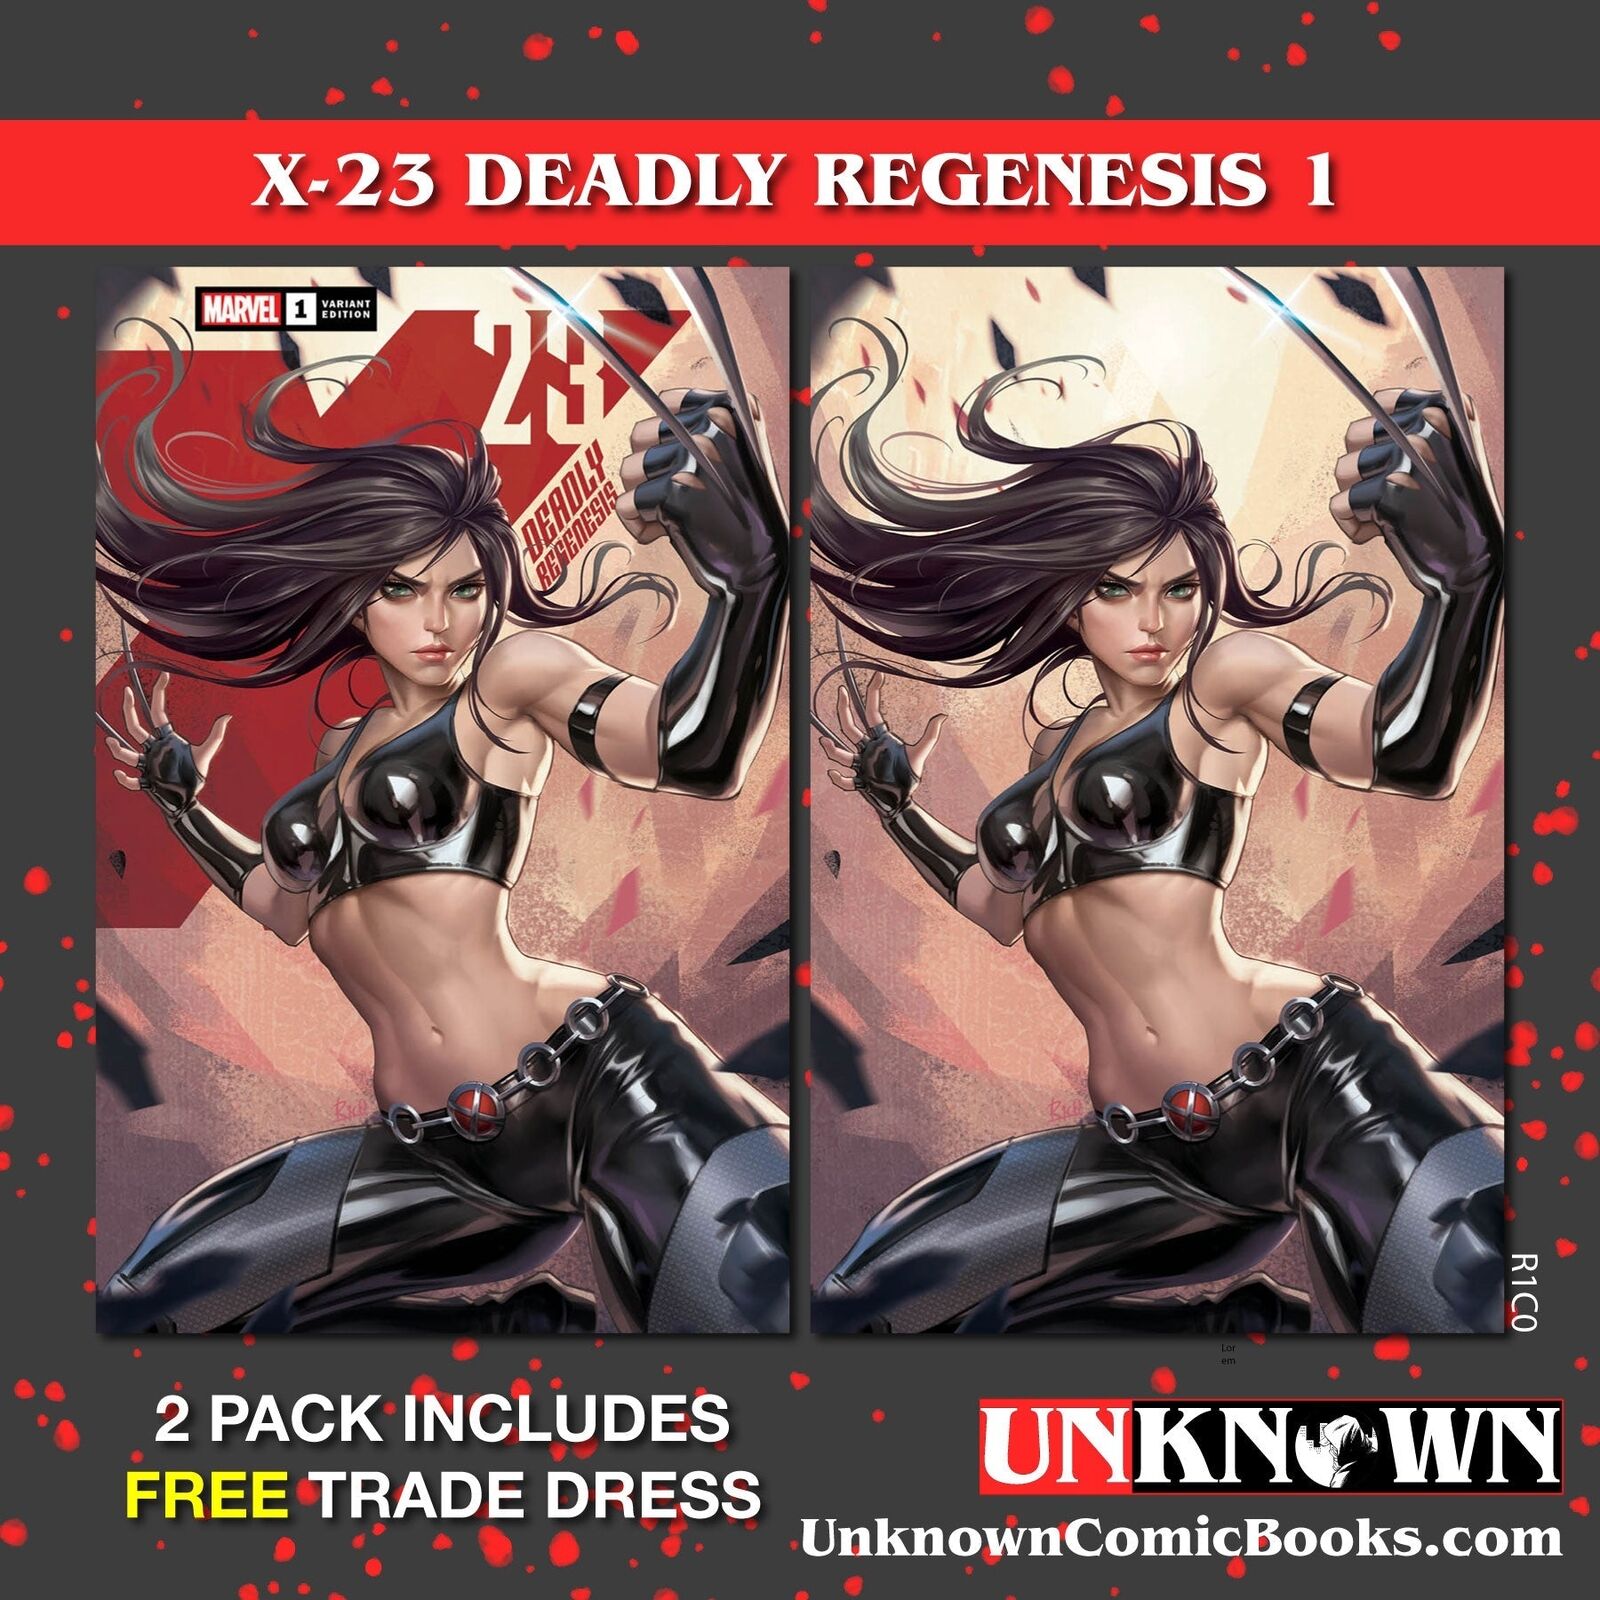 [2 PACK] **FREE TRADE DRESS** X-23: DEADLY REGENESIS #1 UNKNOWN COMICS R1C0 EXCL